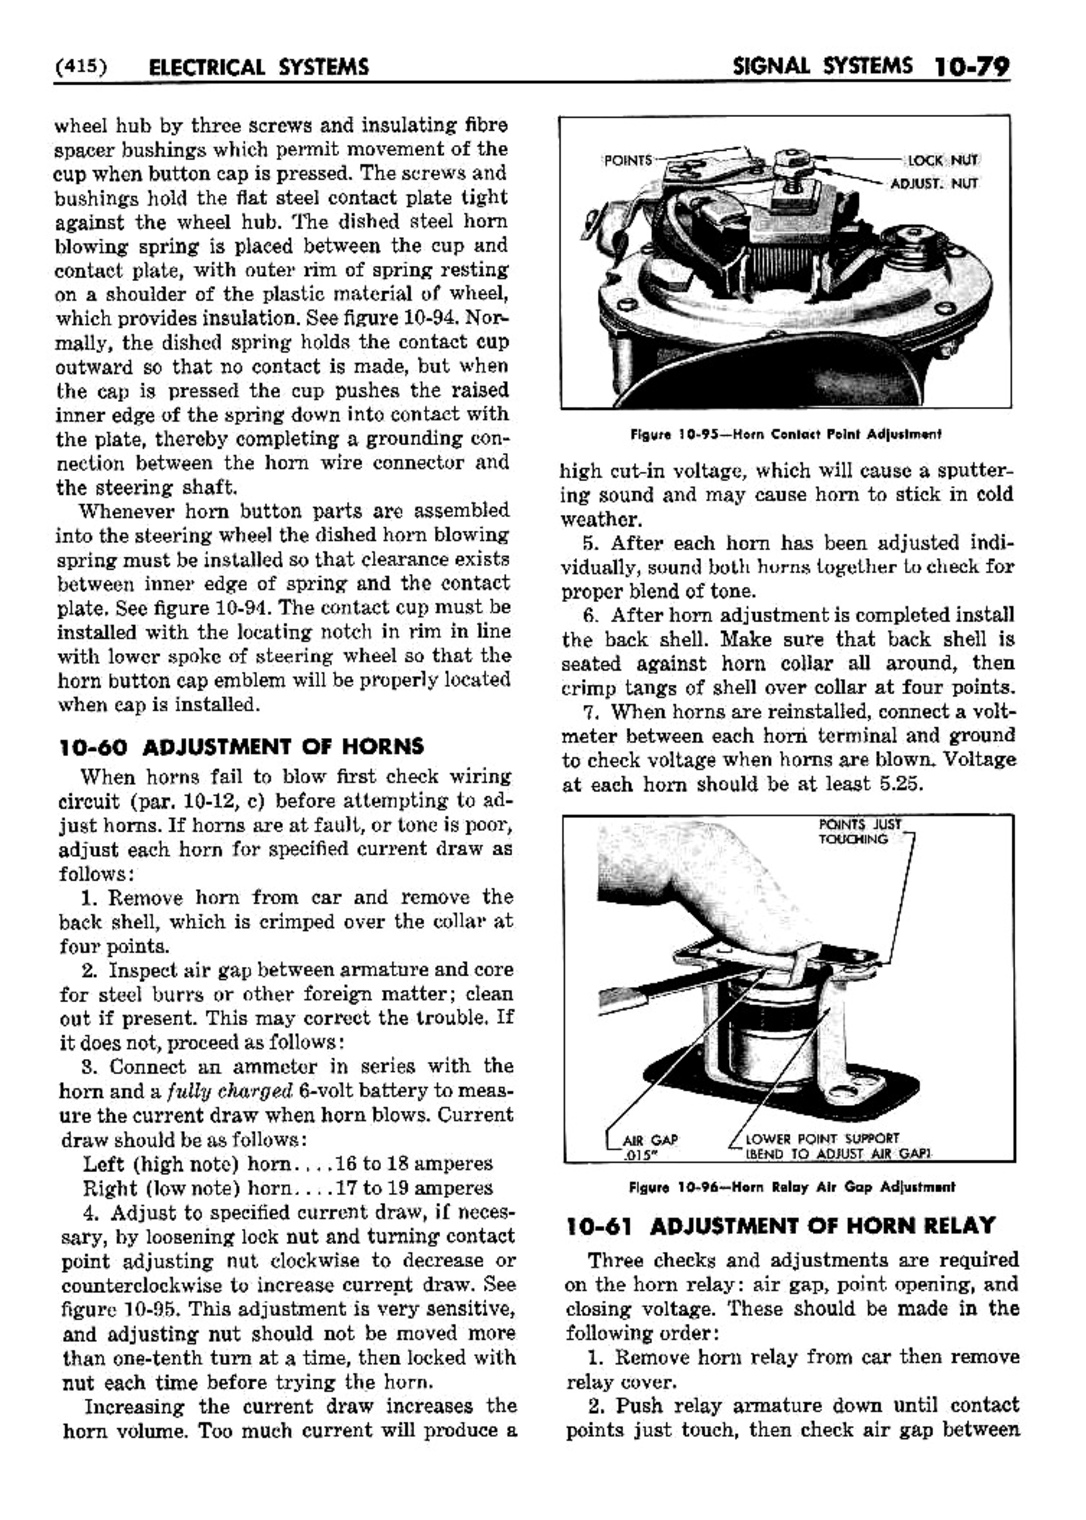 n_11 1952 Buick Shop Manual - Electrical Systems-079-079.jpg